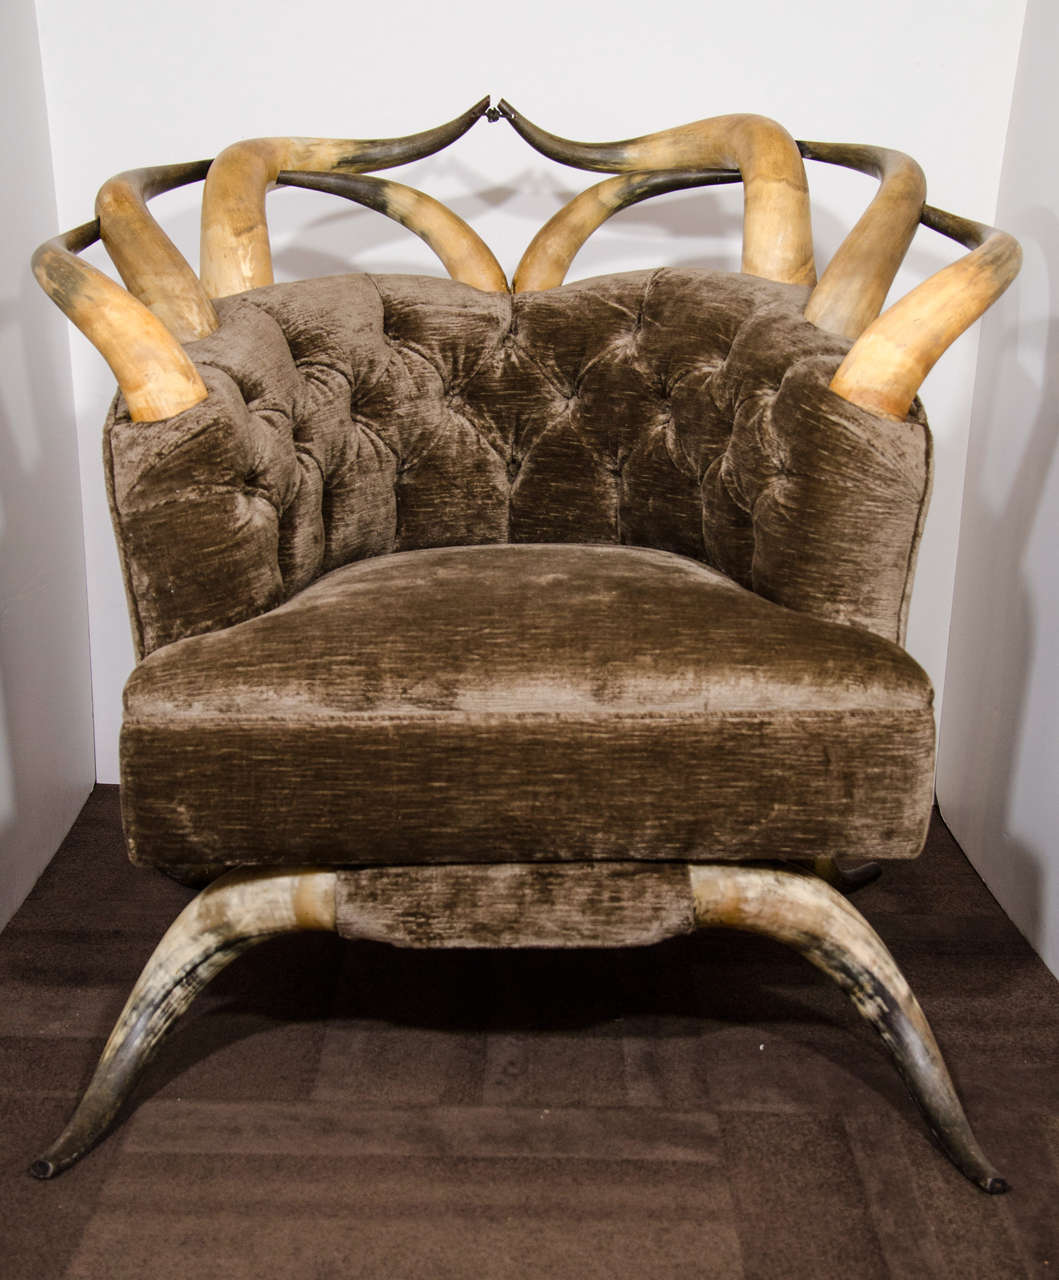 Oustanding Victorian tufted club chair with rare and unique long horns and steer horns.  The chair has a barrel or tub design and has been newly upholstered in a luxe mushroom textured velvet.
Steer horns are strategically designed along the upper